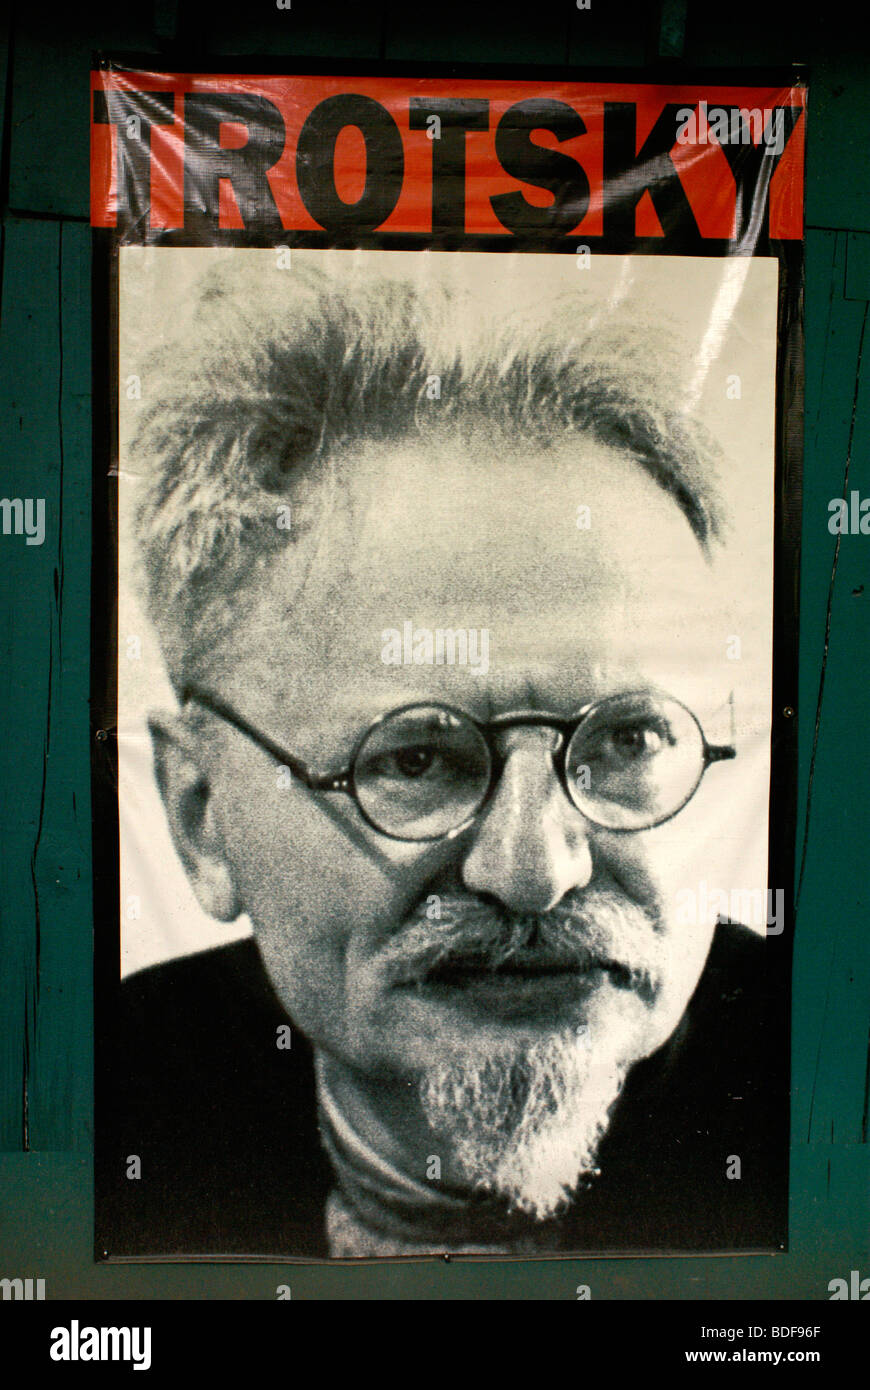 Photograph poster of Leon Trotsky in the Museo Casa de Leon Trotsky or Leon Trotsky House Museum in Coyoacan, Mexico City Stock Photo